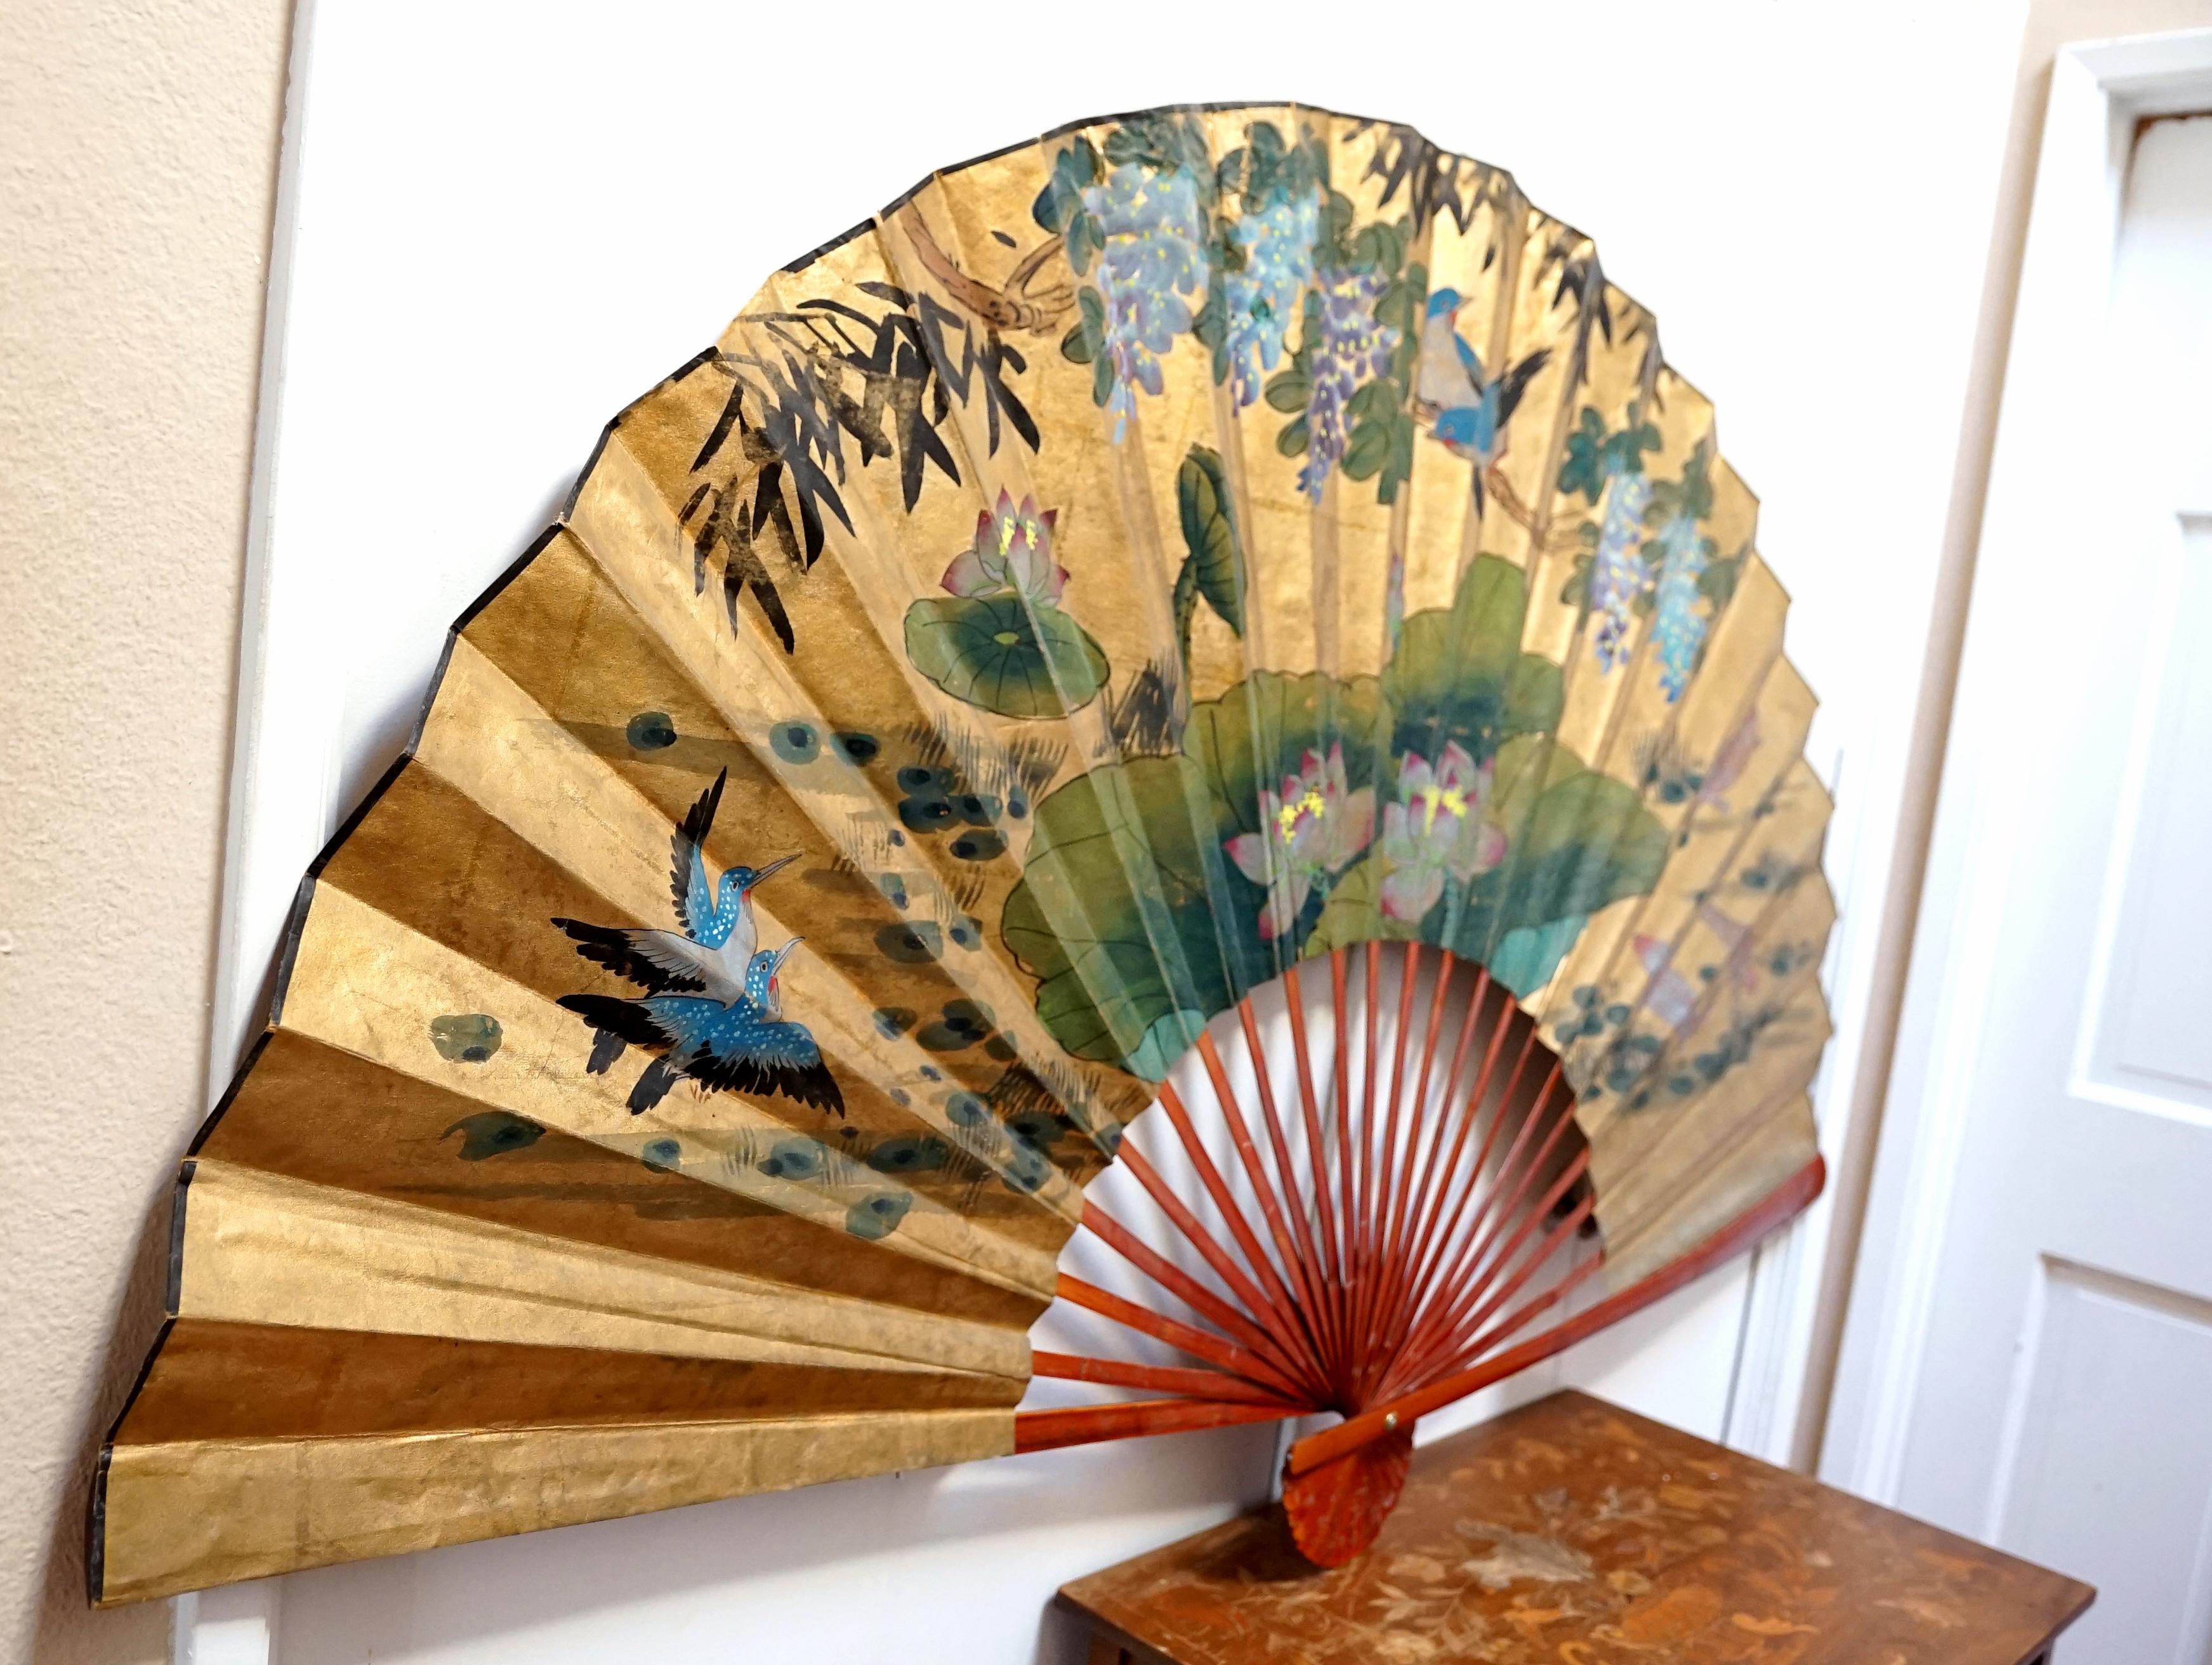 This hand painted gilt monumental folded Chinese Export fan is worth collecting. This is a vintage piece from the 1960s most likely. The fan is ready for installation with two threaded hooks on the reverse side. This makes a wonderful sculptural